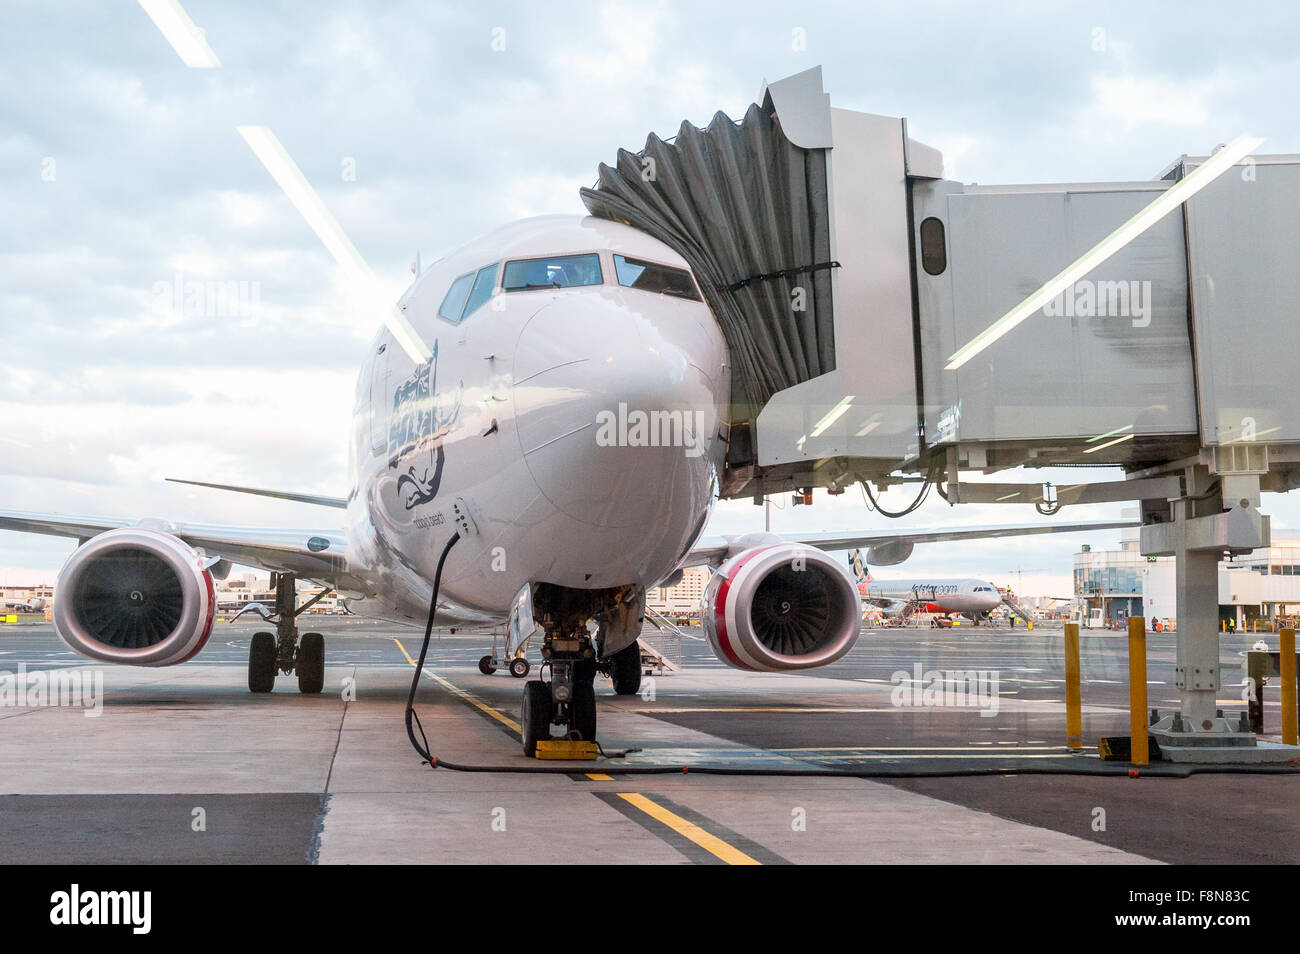 Airplane on the tarmac at Cairns Airport, Australia. Stock Photo